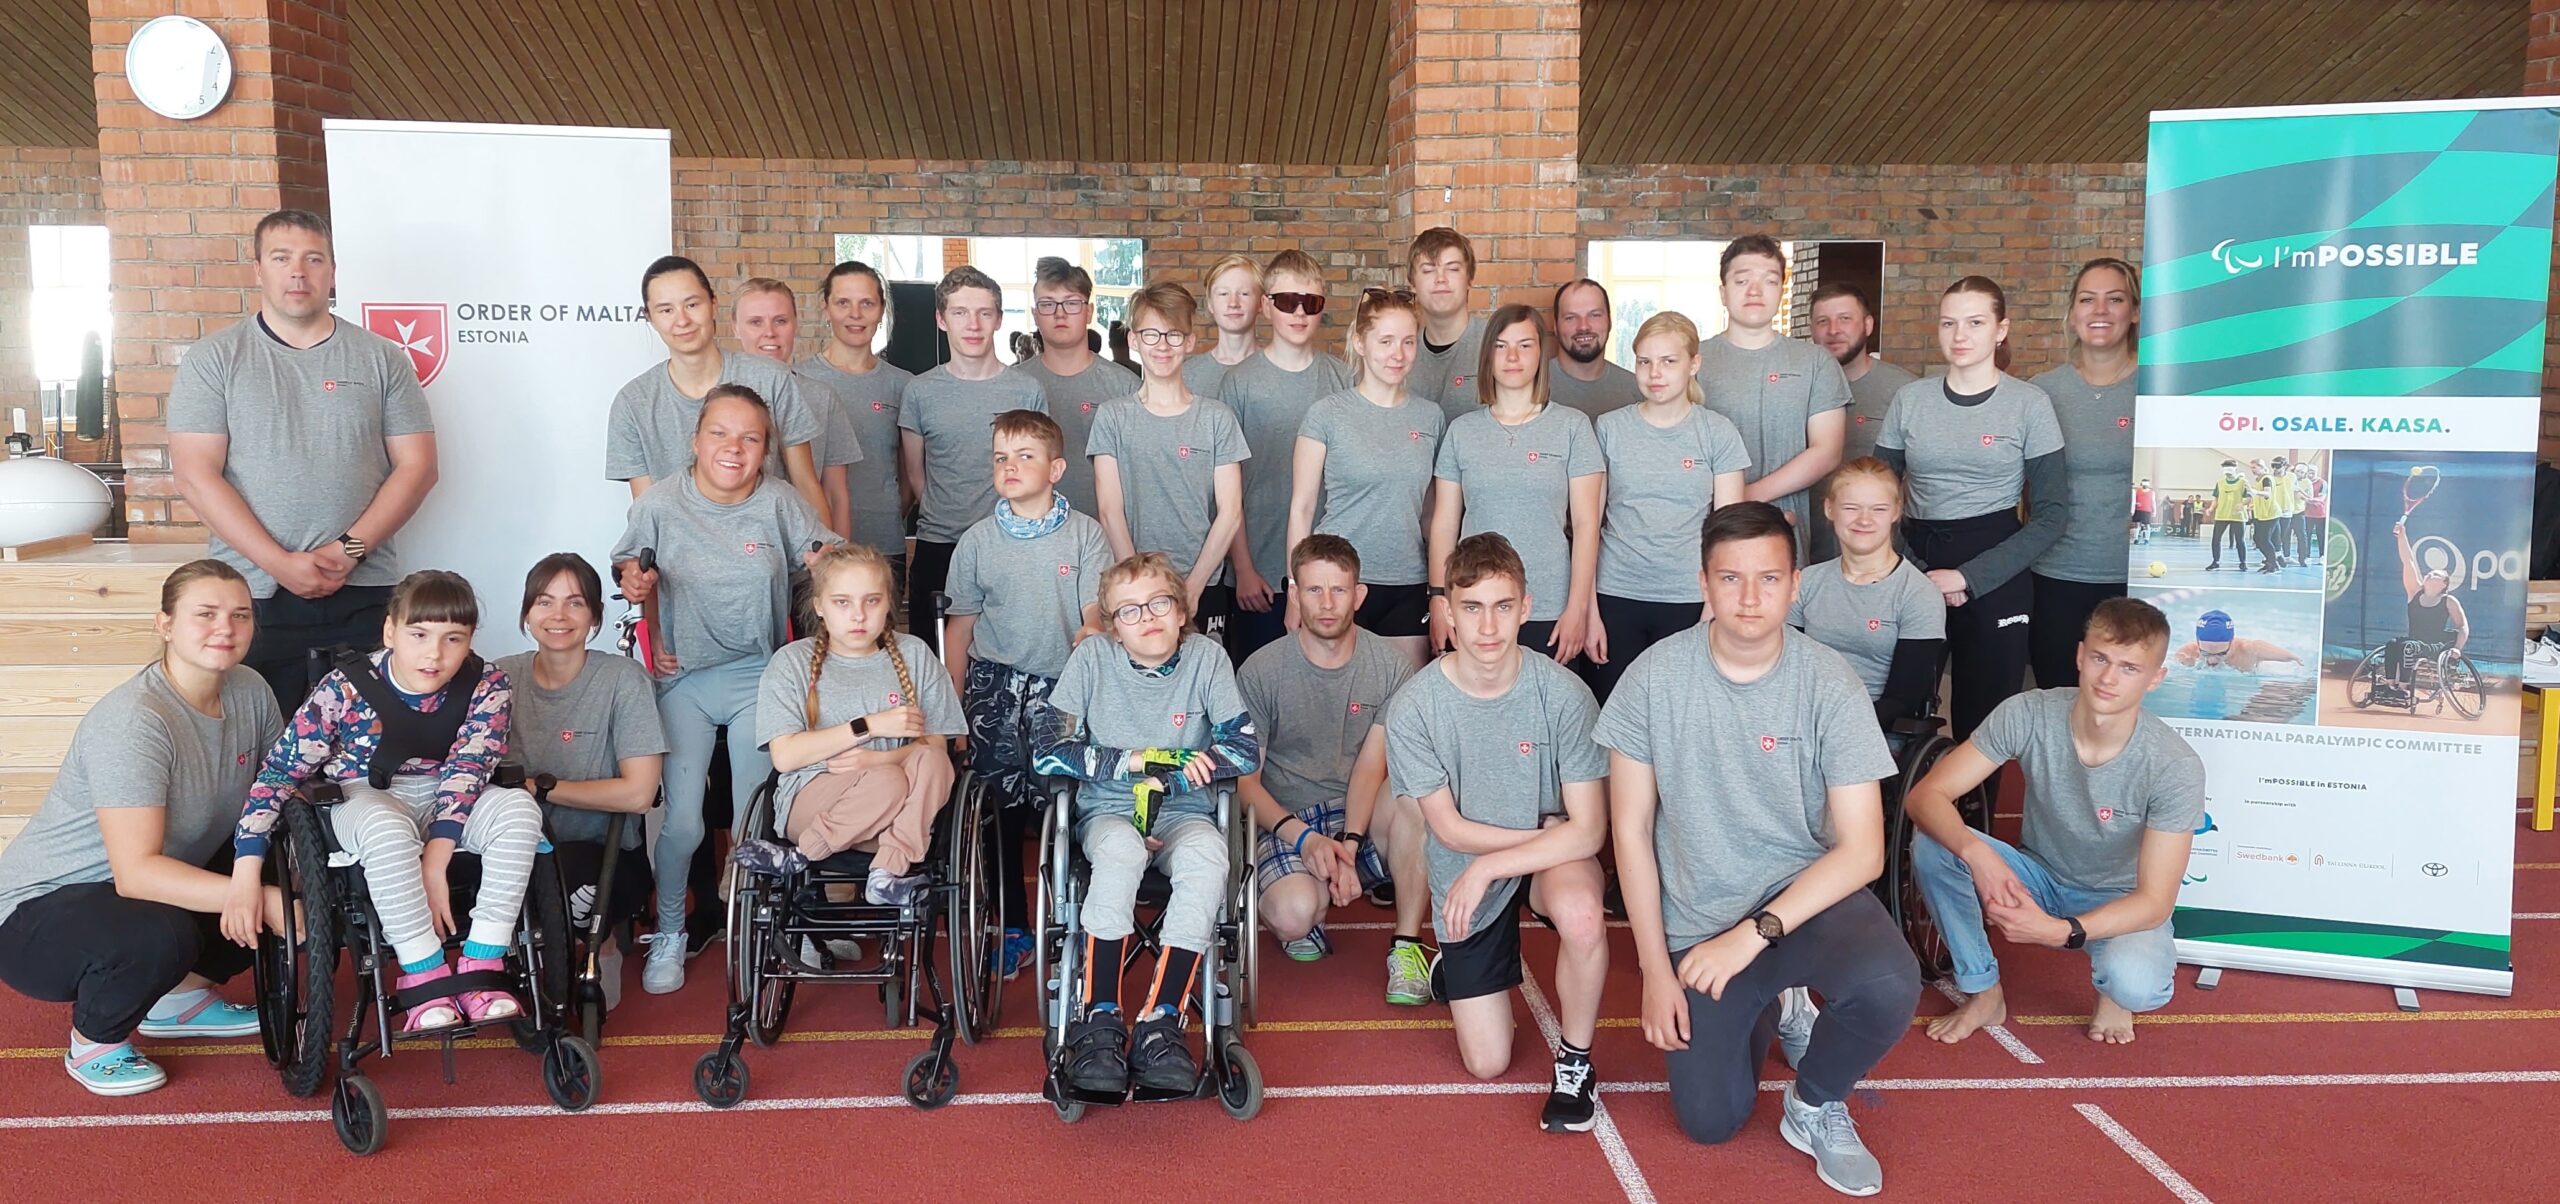 The Order of Malta Estonia supported the organization of a parasports weekend for children and young people with disabilities